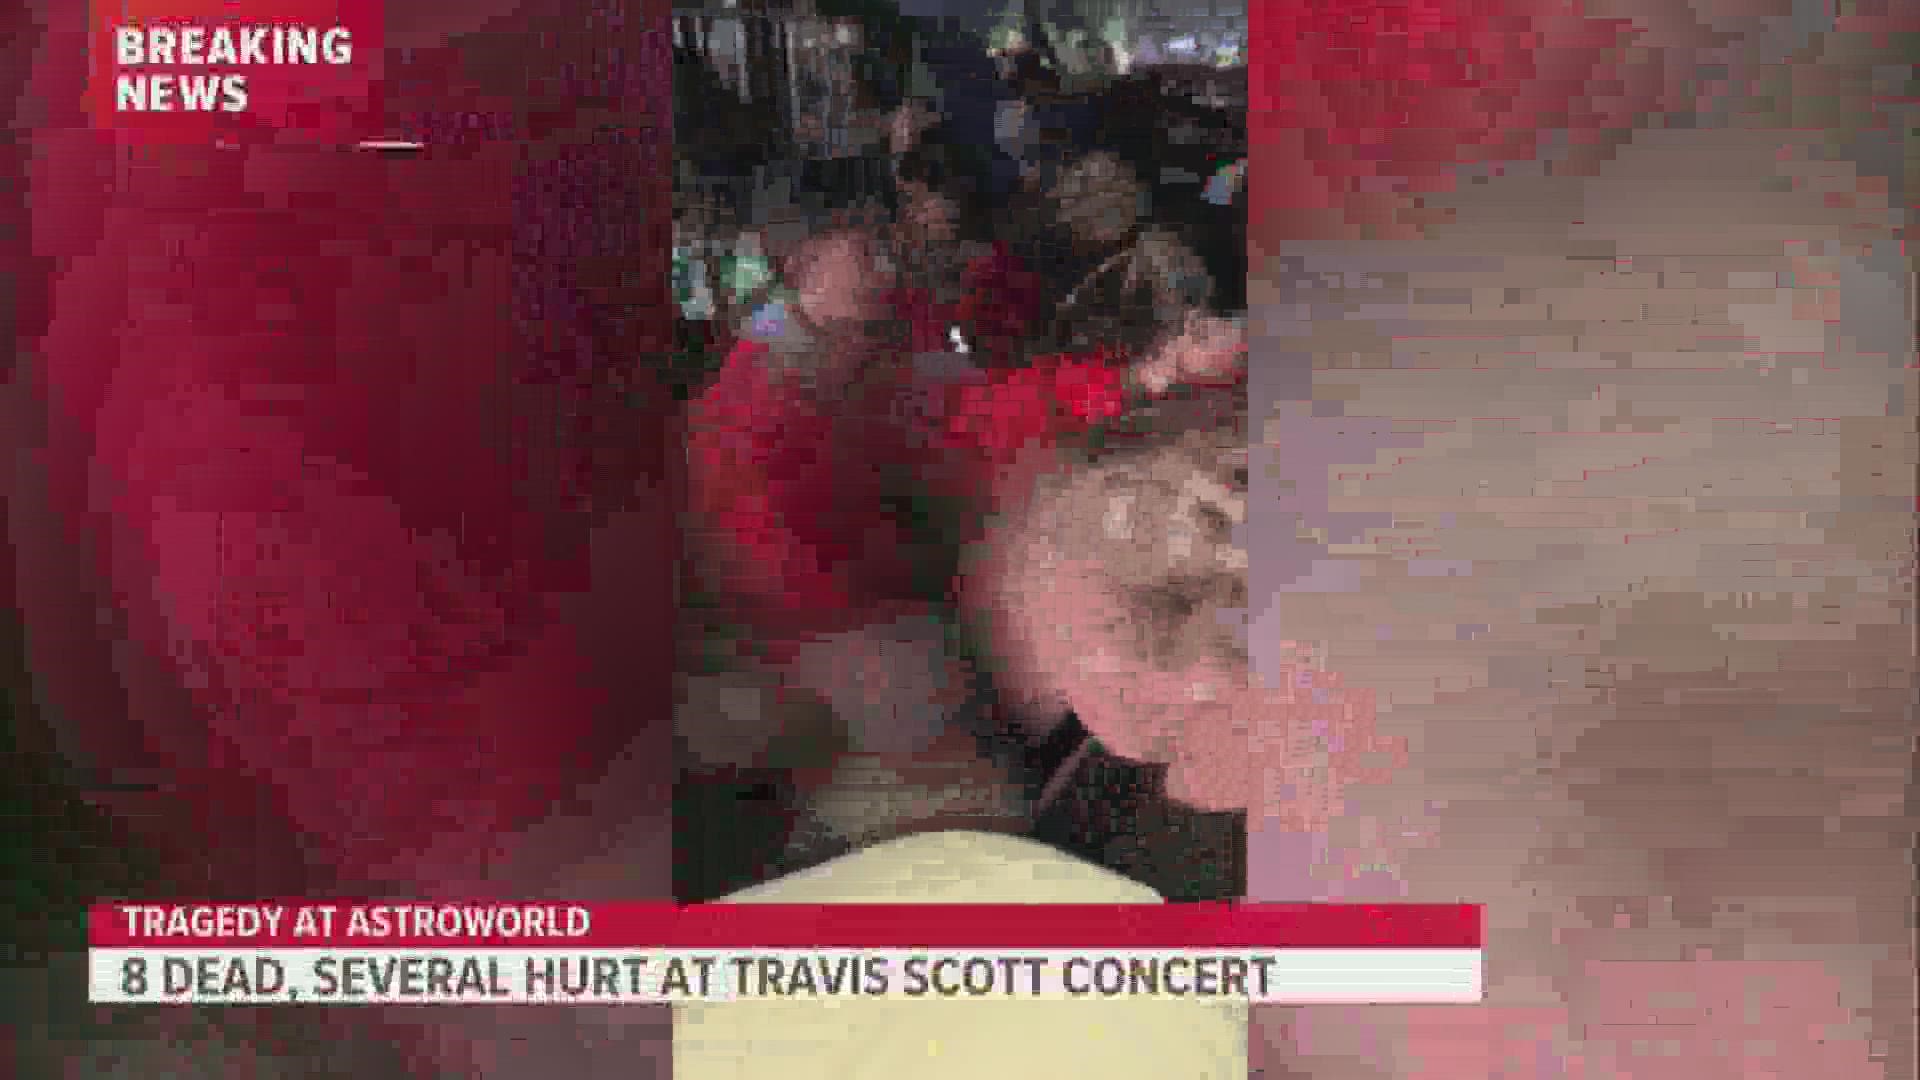 Harris County Judge Lina Hidalgo is calling for an independent investigation into the tragedy at the Astroworld Festival.